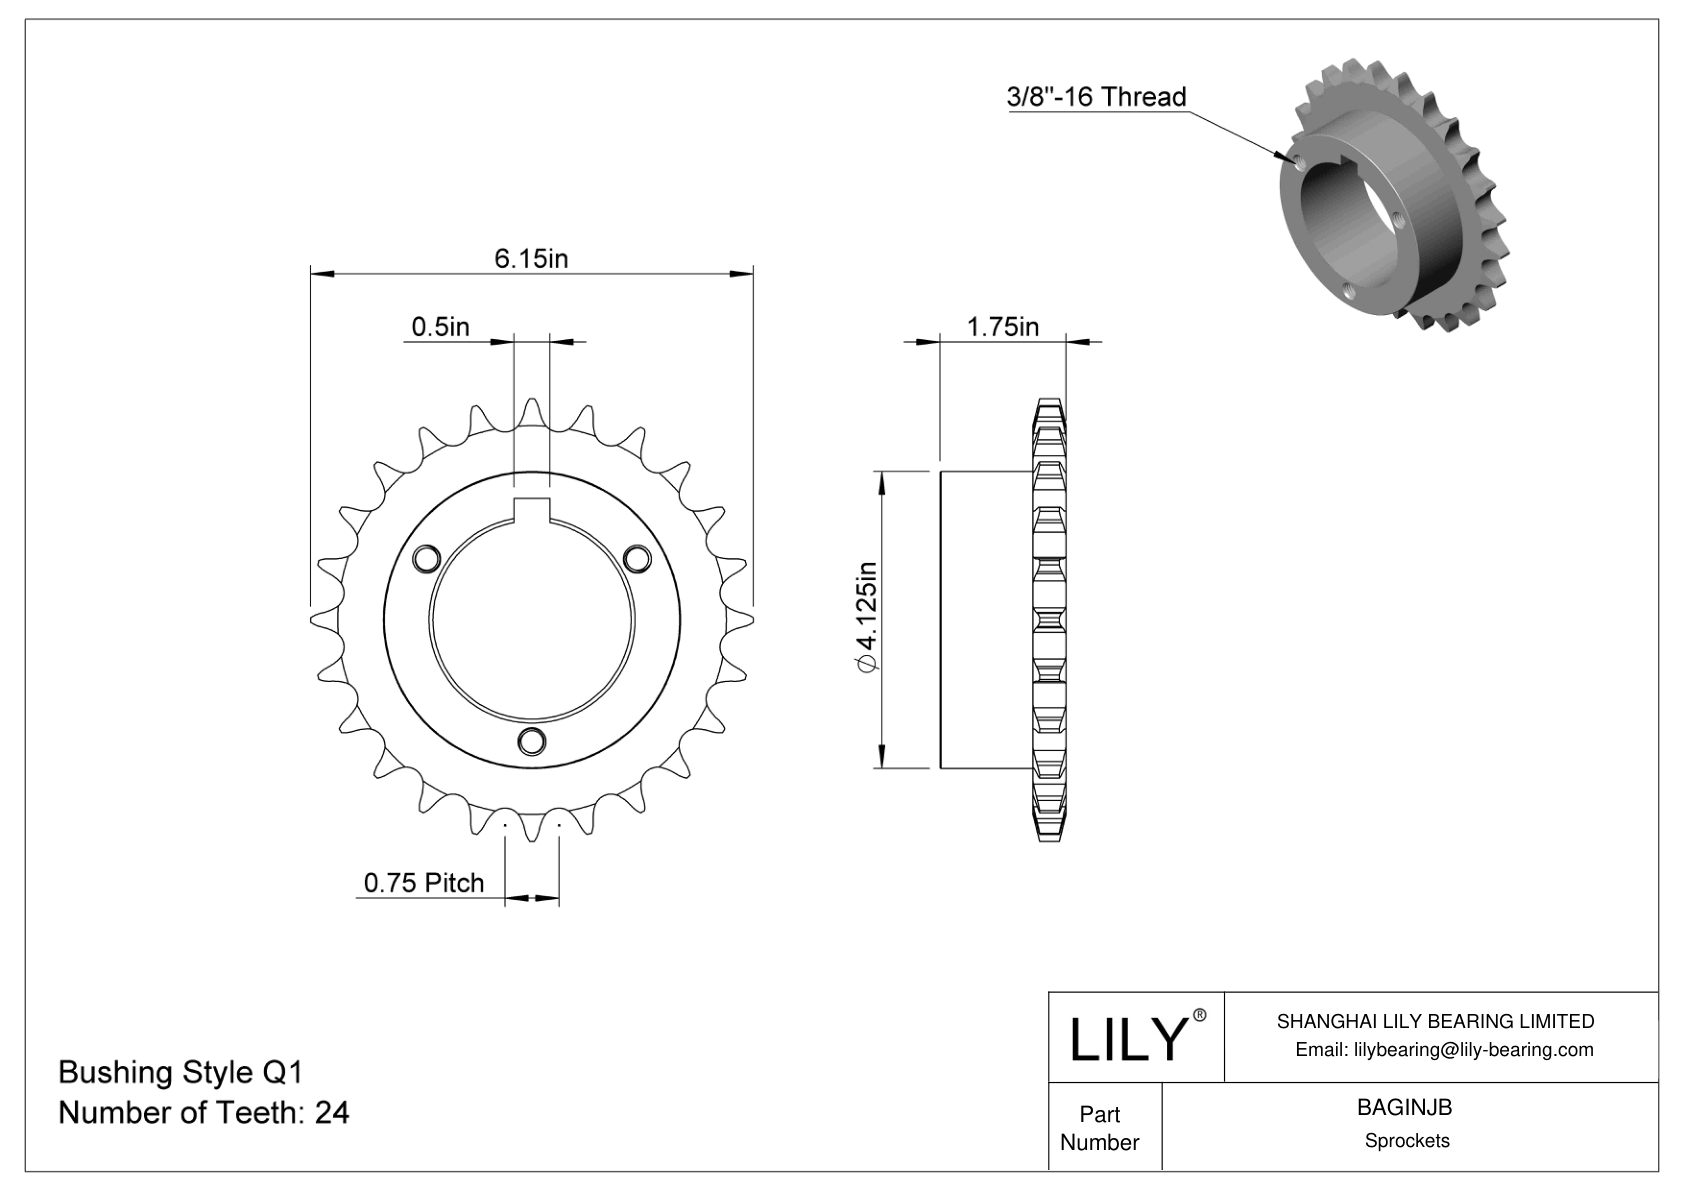 BAGINJB Split-Tapered Bushing-Bore Sprockets for ANSI Roller Chain cad drawing